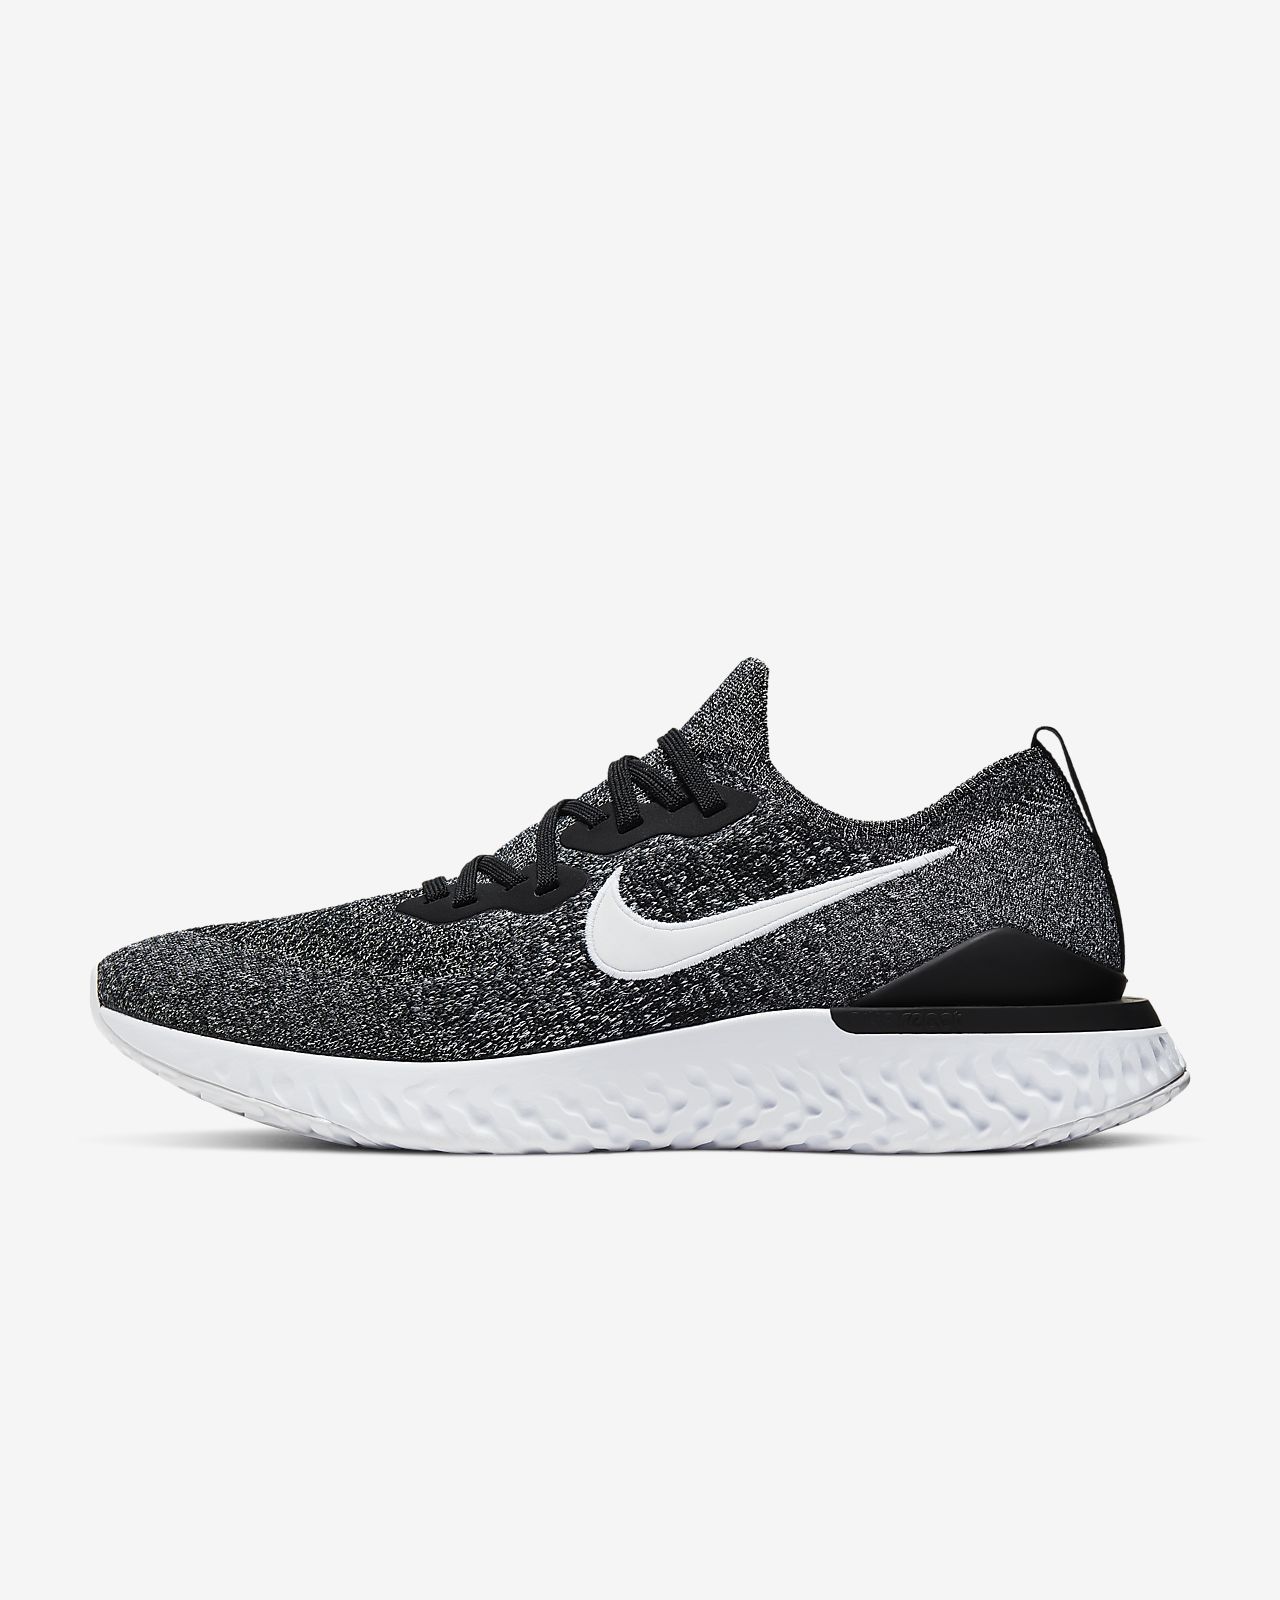 best nike shoes for gym